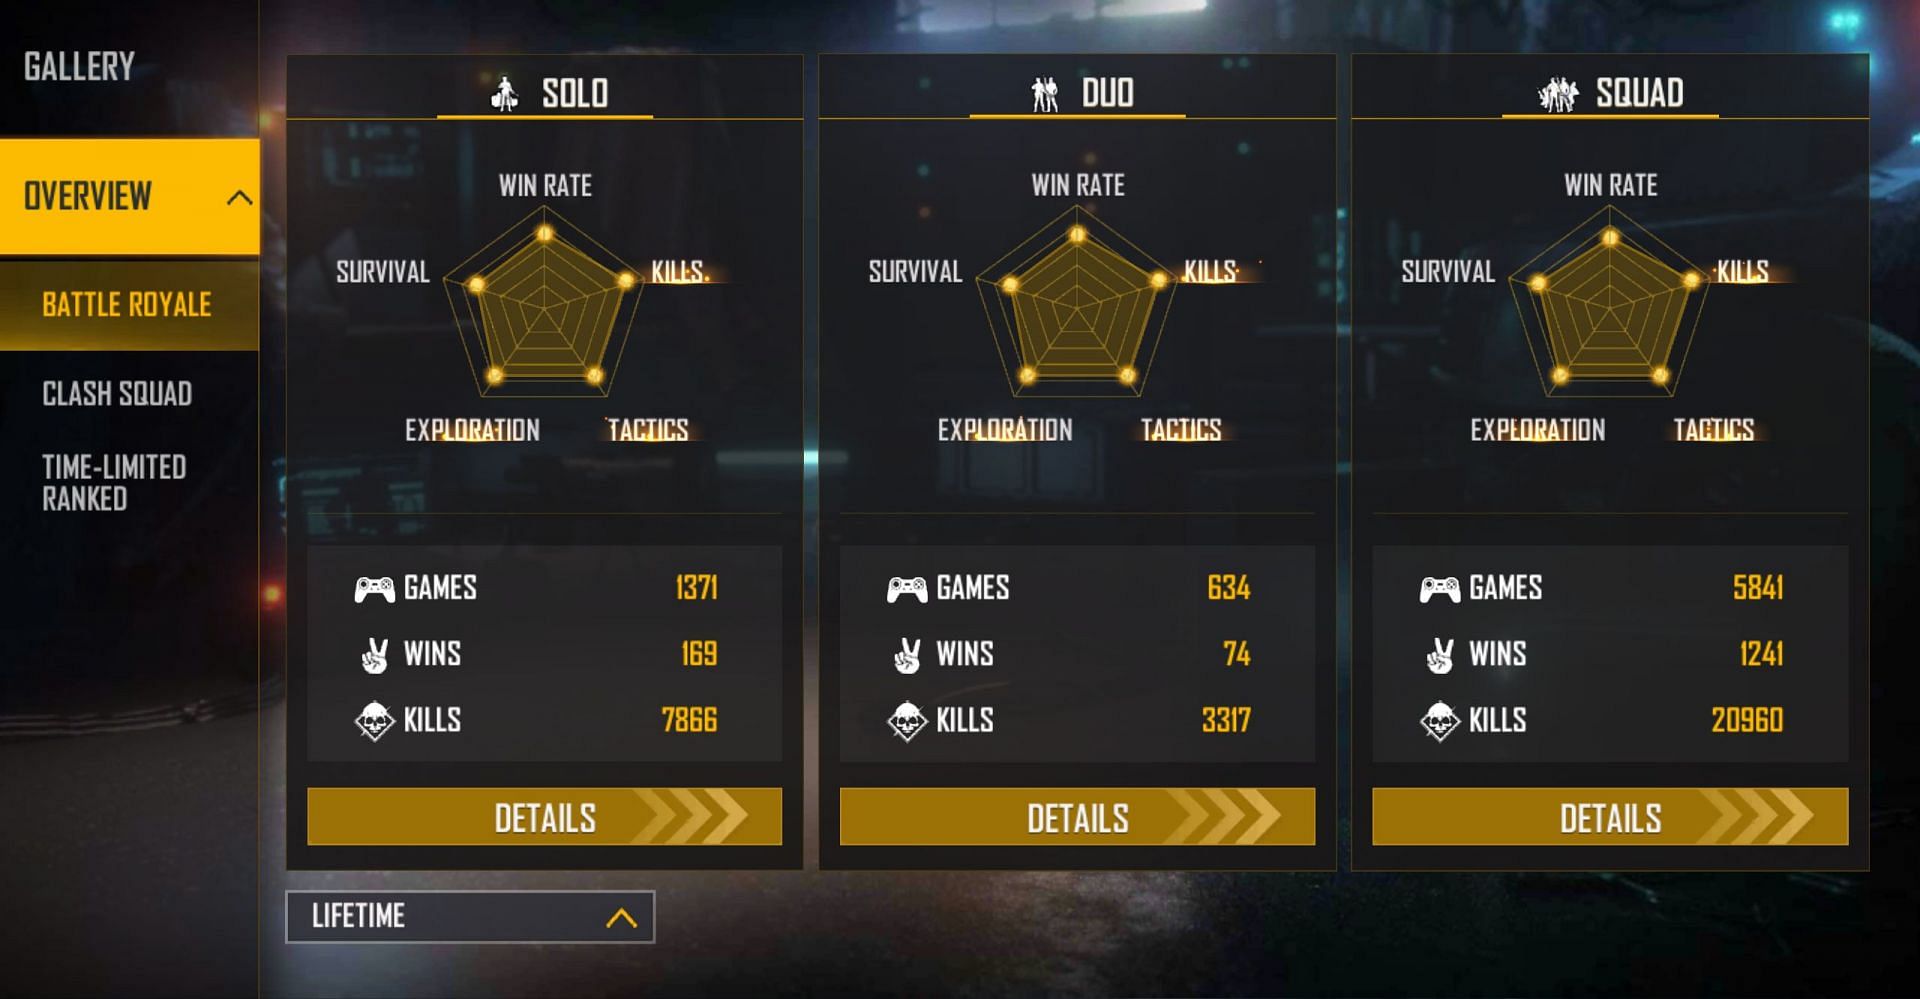 He has excellent lifetime stats in all three modes (Image via Garena)